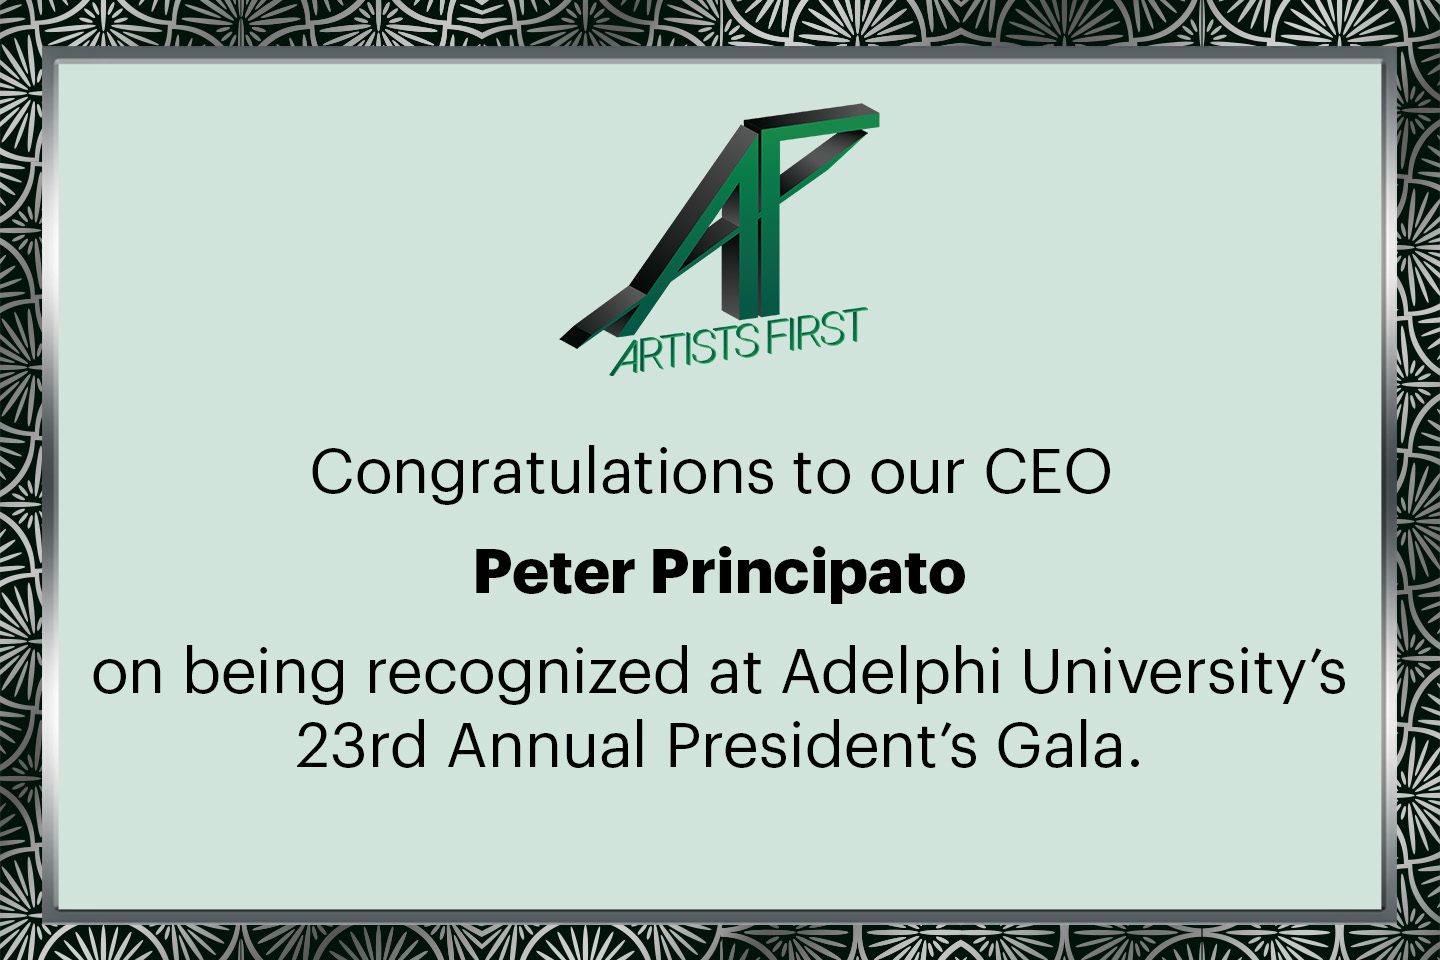 Congratulations to our CEO Pete Principato on being recognized at the Adelphi University 23rd annual resident's Gala.